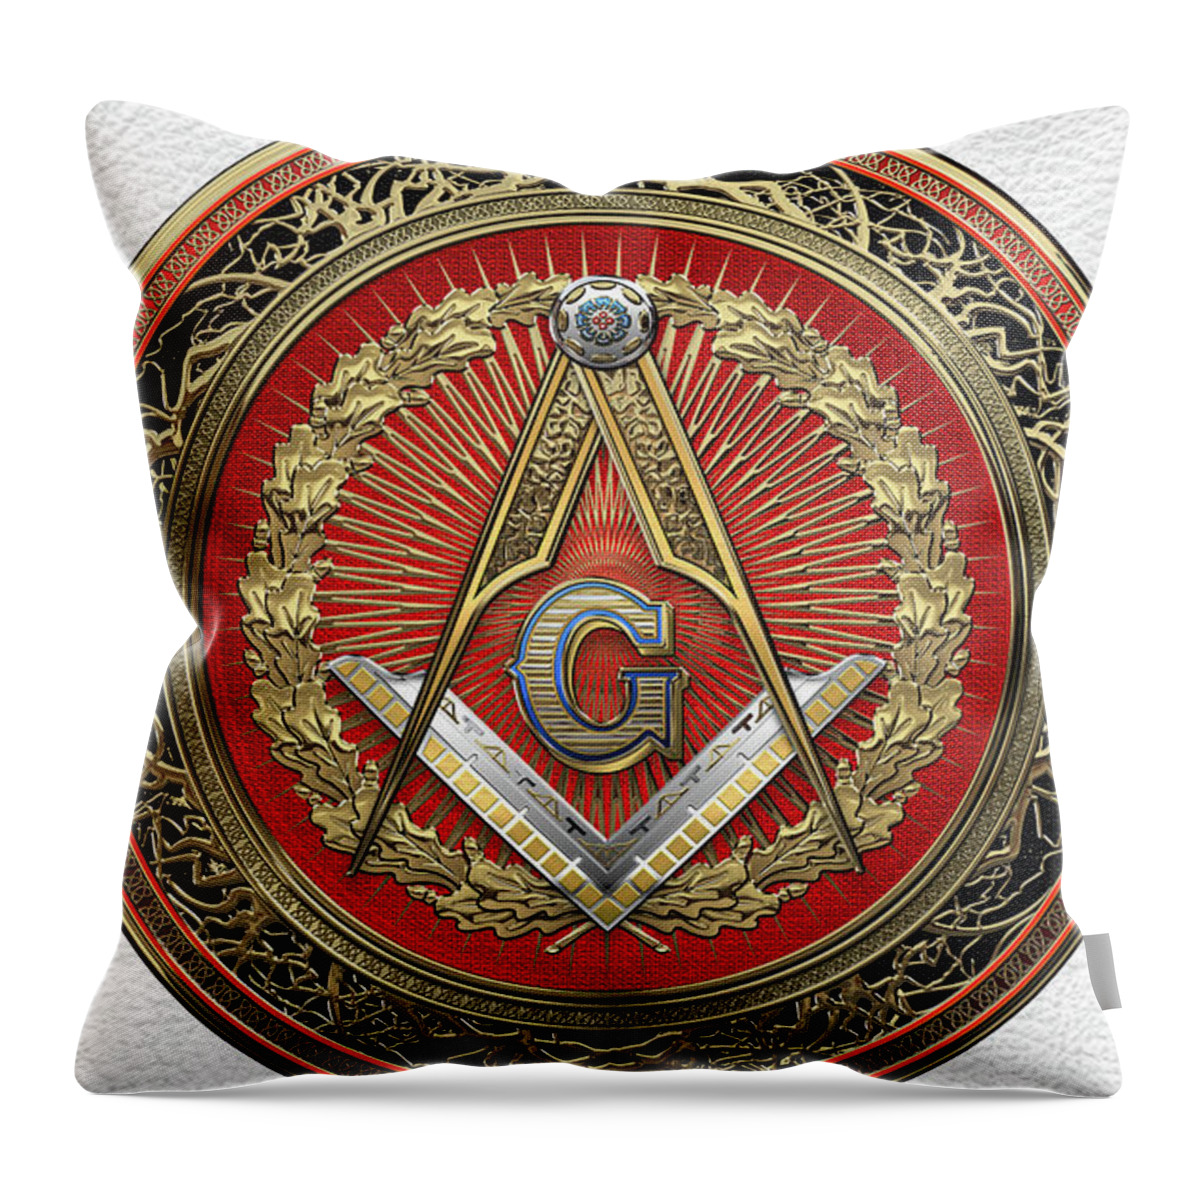 Ancient Brotherhoods Collection By Serge Averbukh Throw Pillow featuring the digital art 3rd Degree Mason Gold Jewel - Master Mason Square and Compasses over White Leather by Serge Averbukh